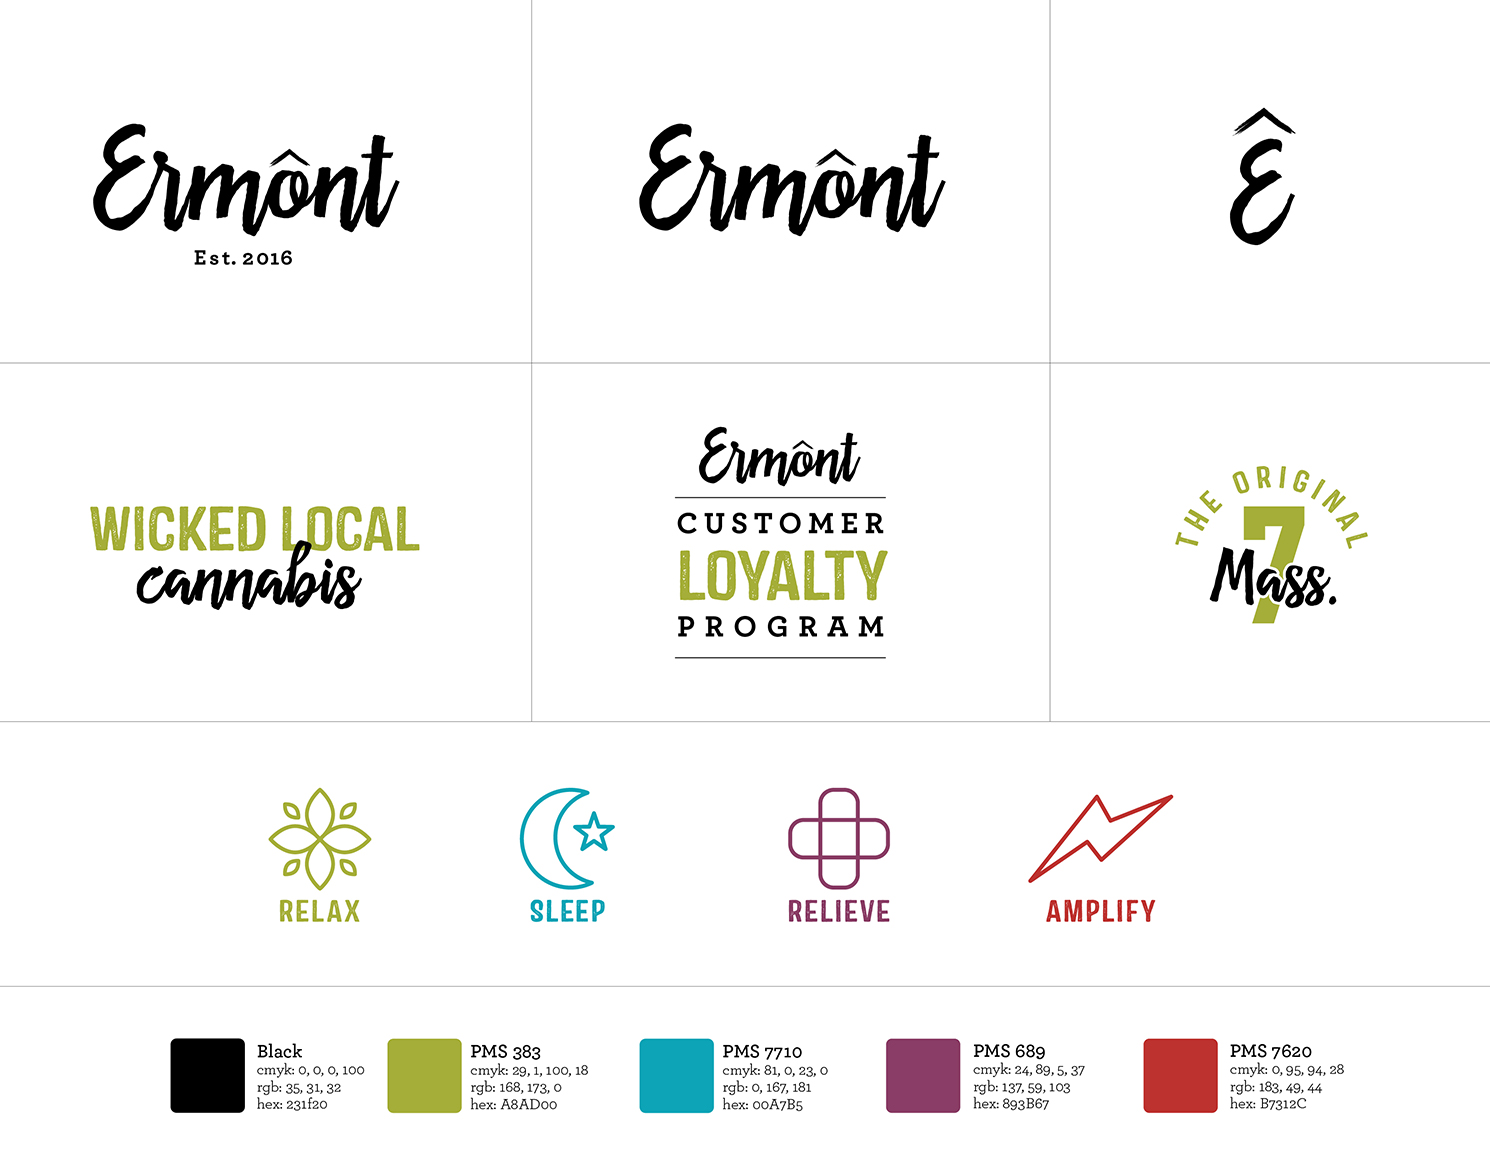 Ermont logo and branded assets including symbol and other icons